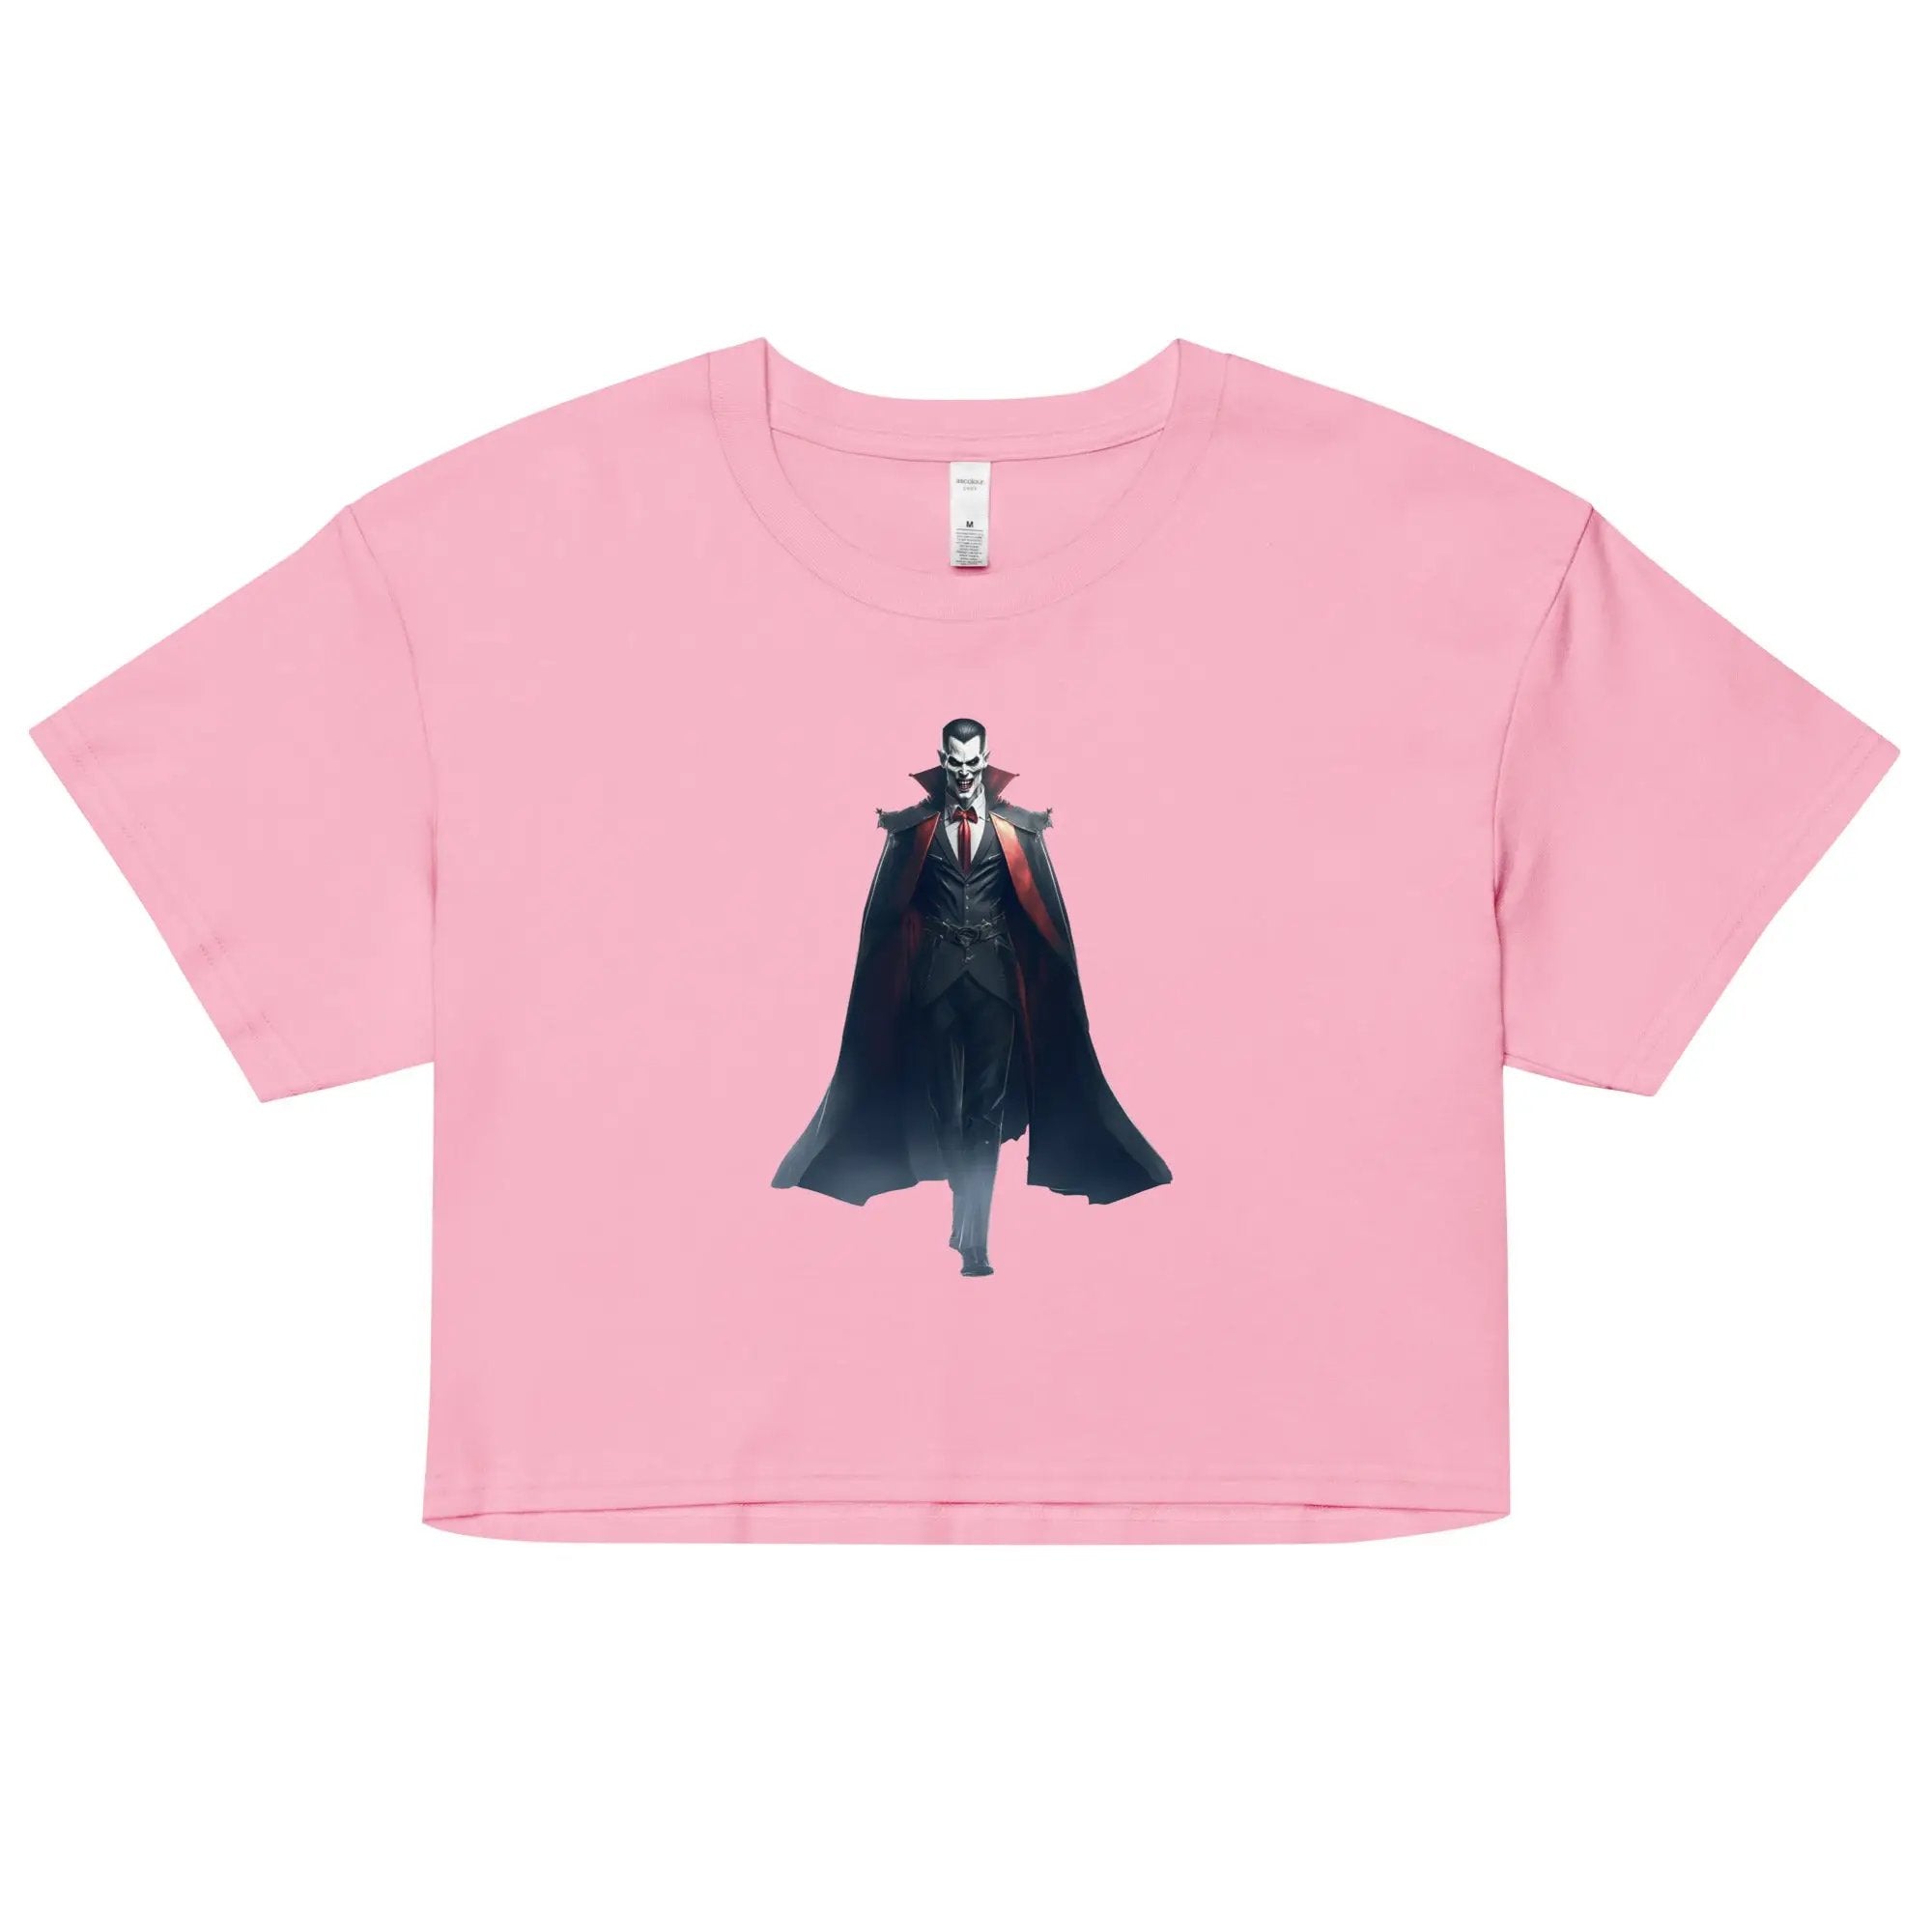 The Monster Squad "Dracula" Women’s crop top